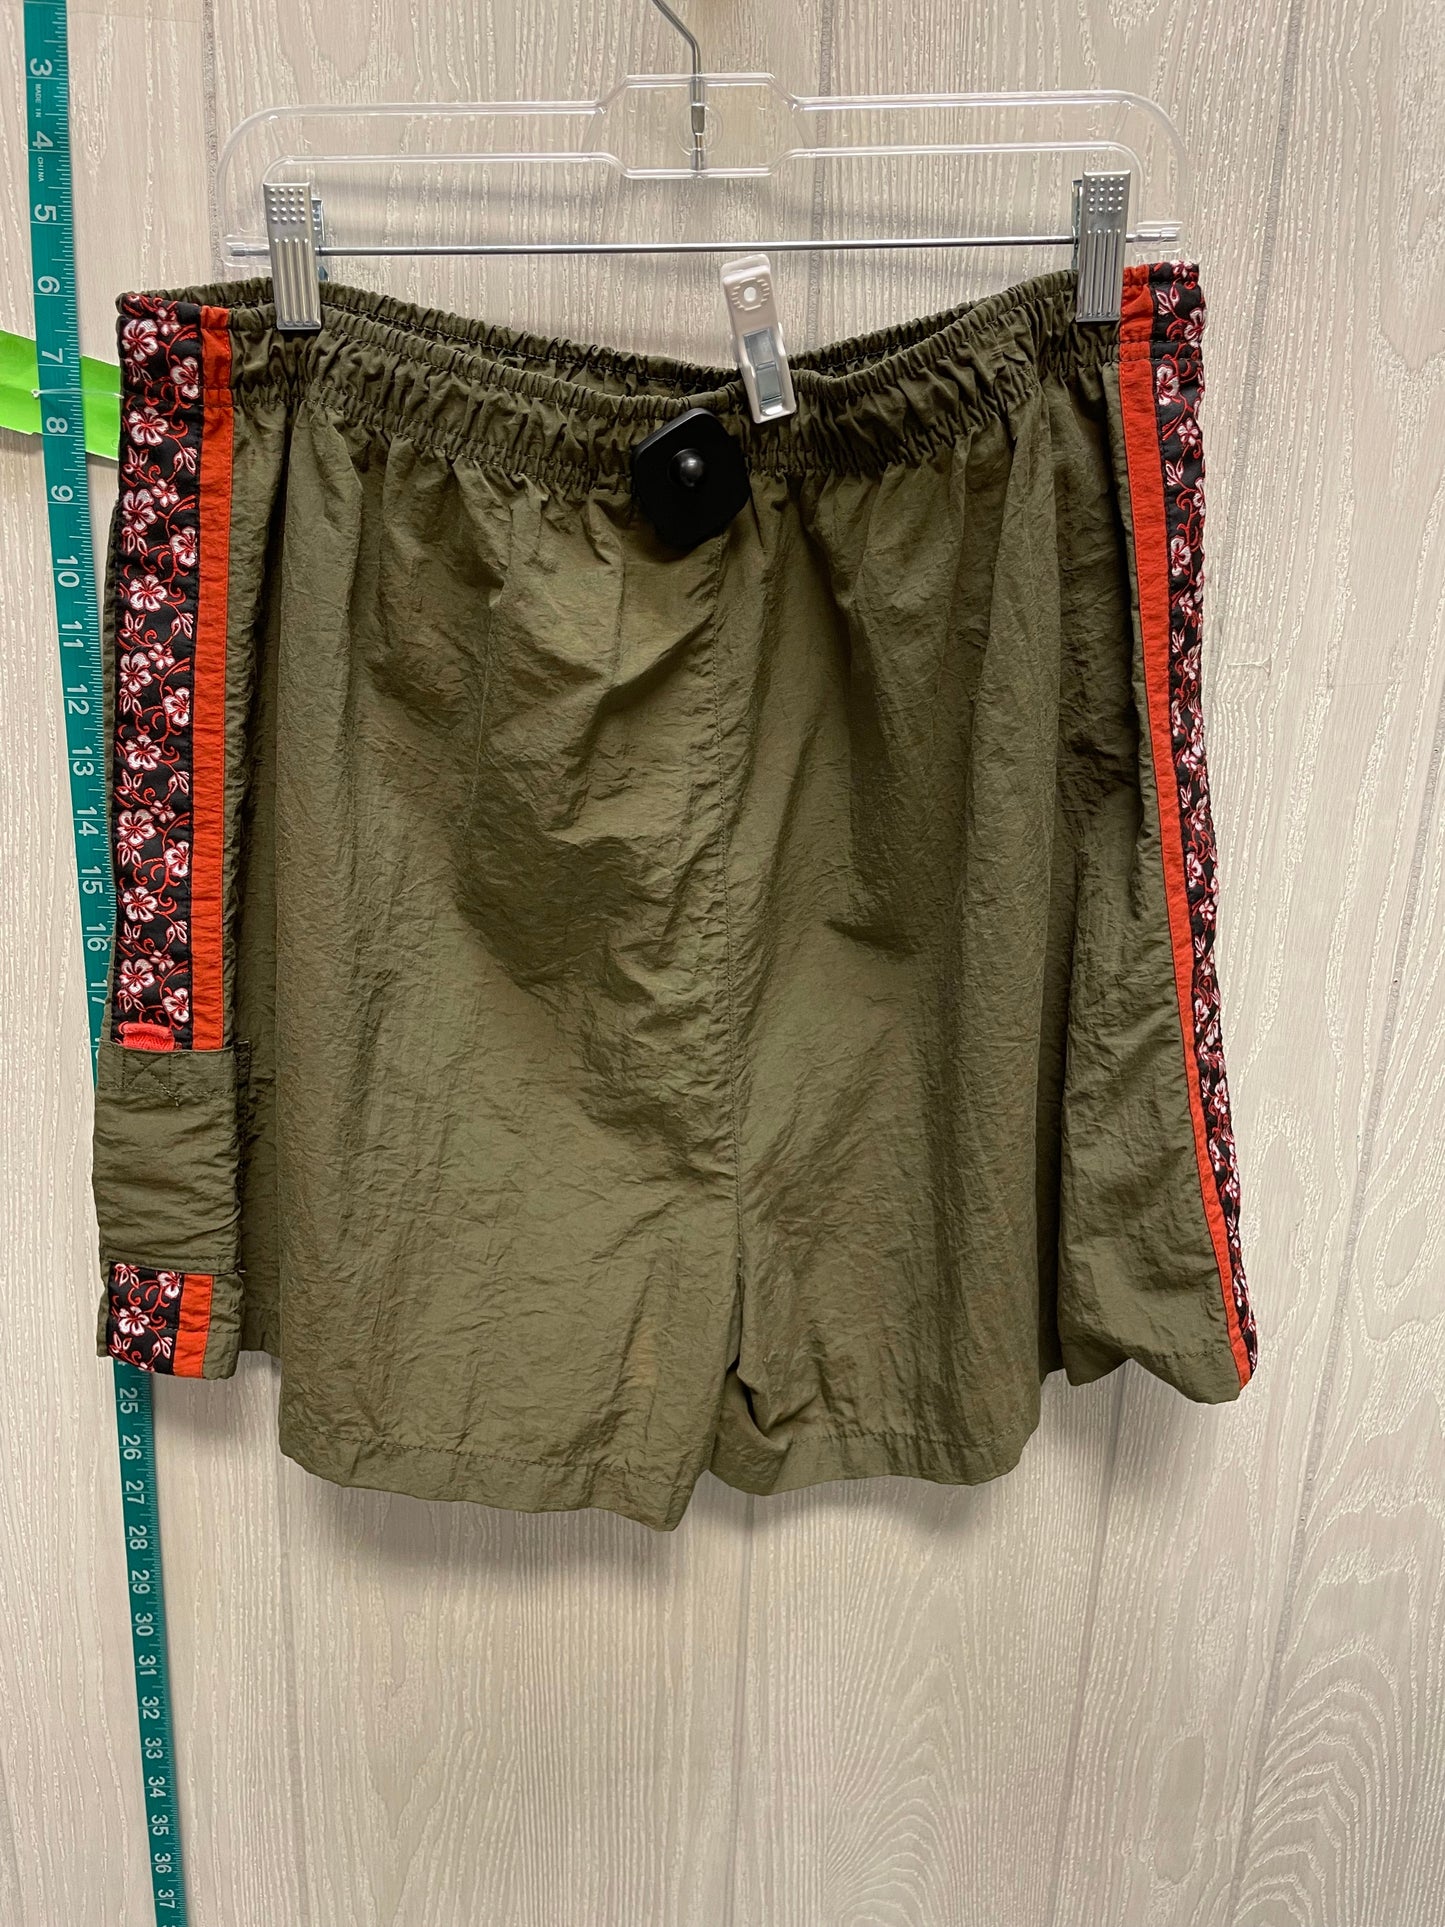 Green & Red Shorts Just My Size, Size 18